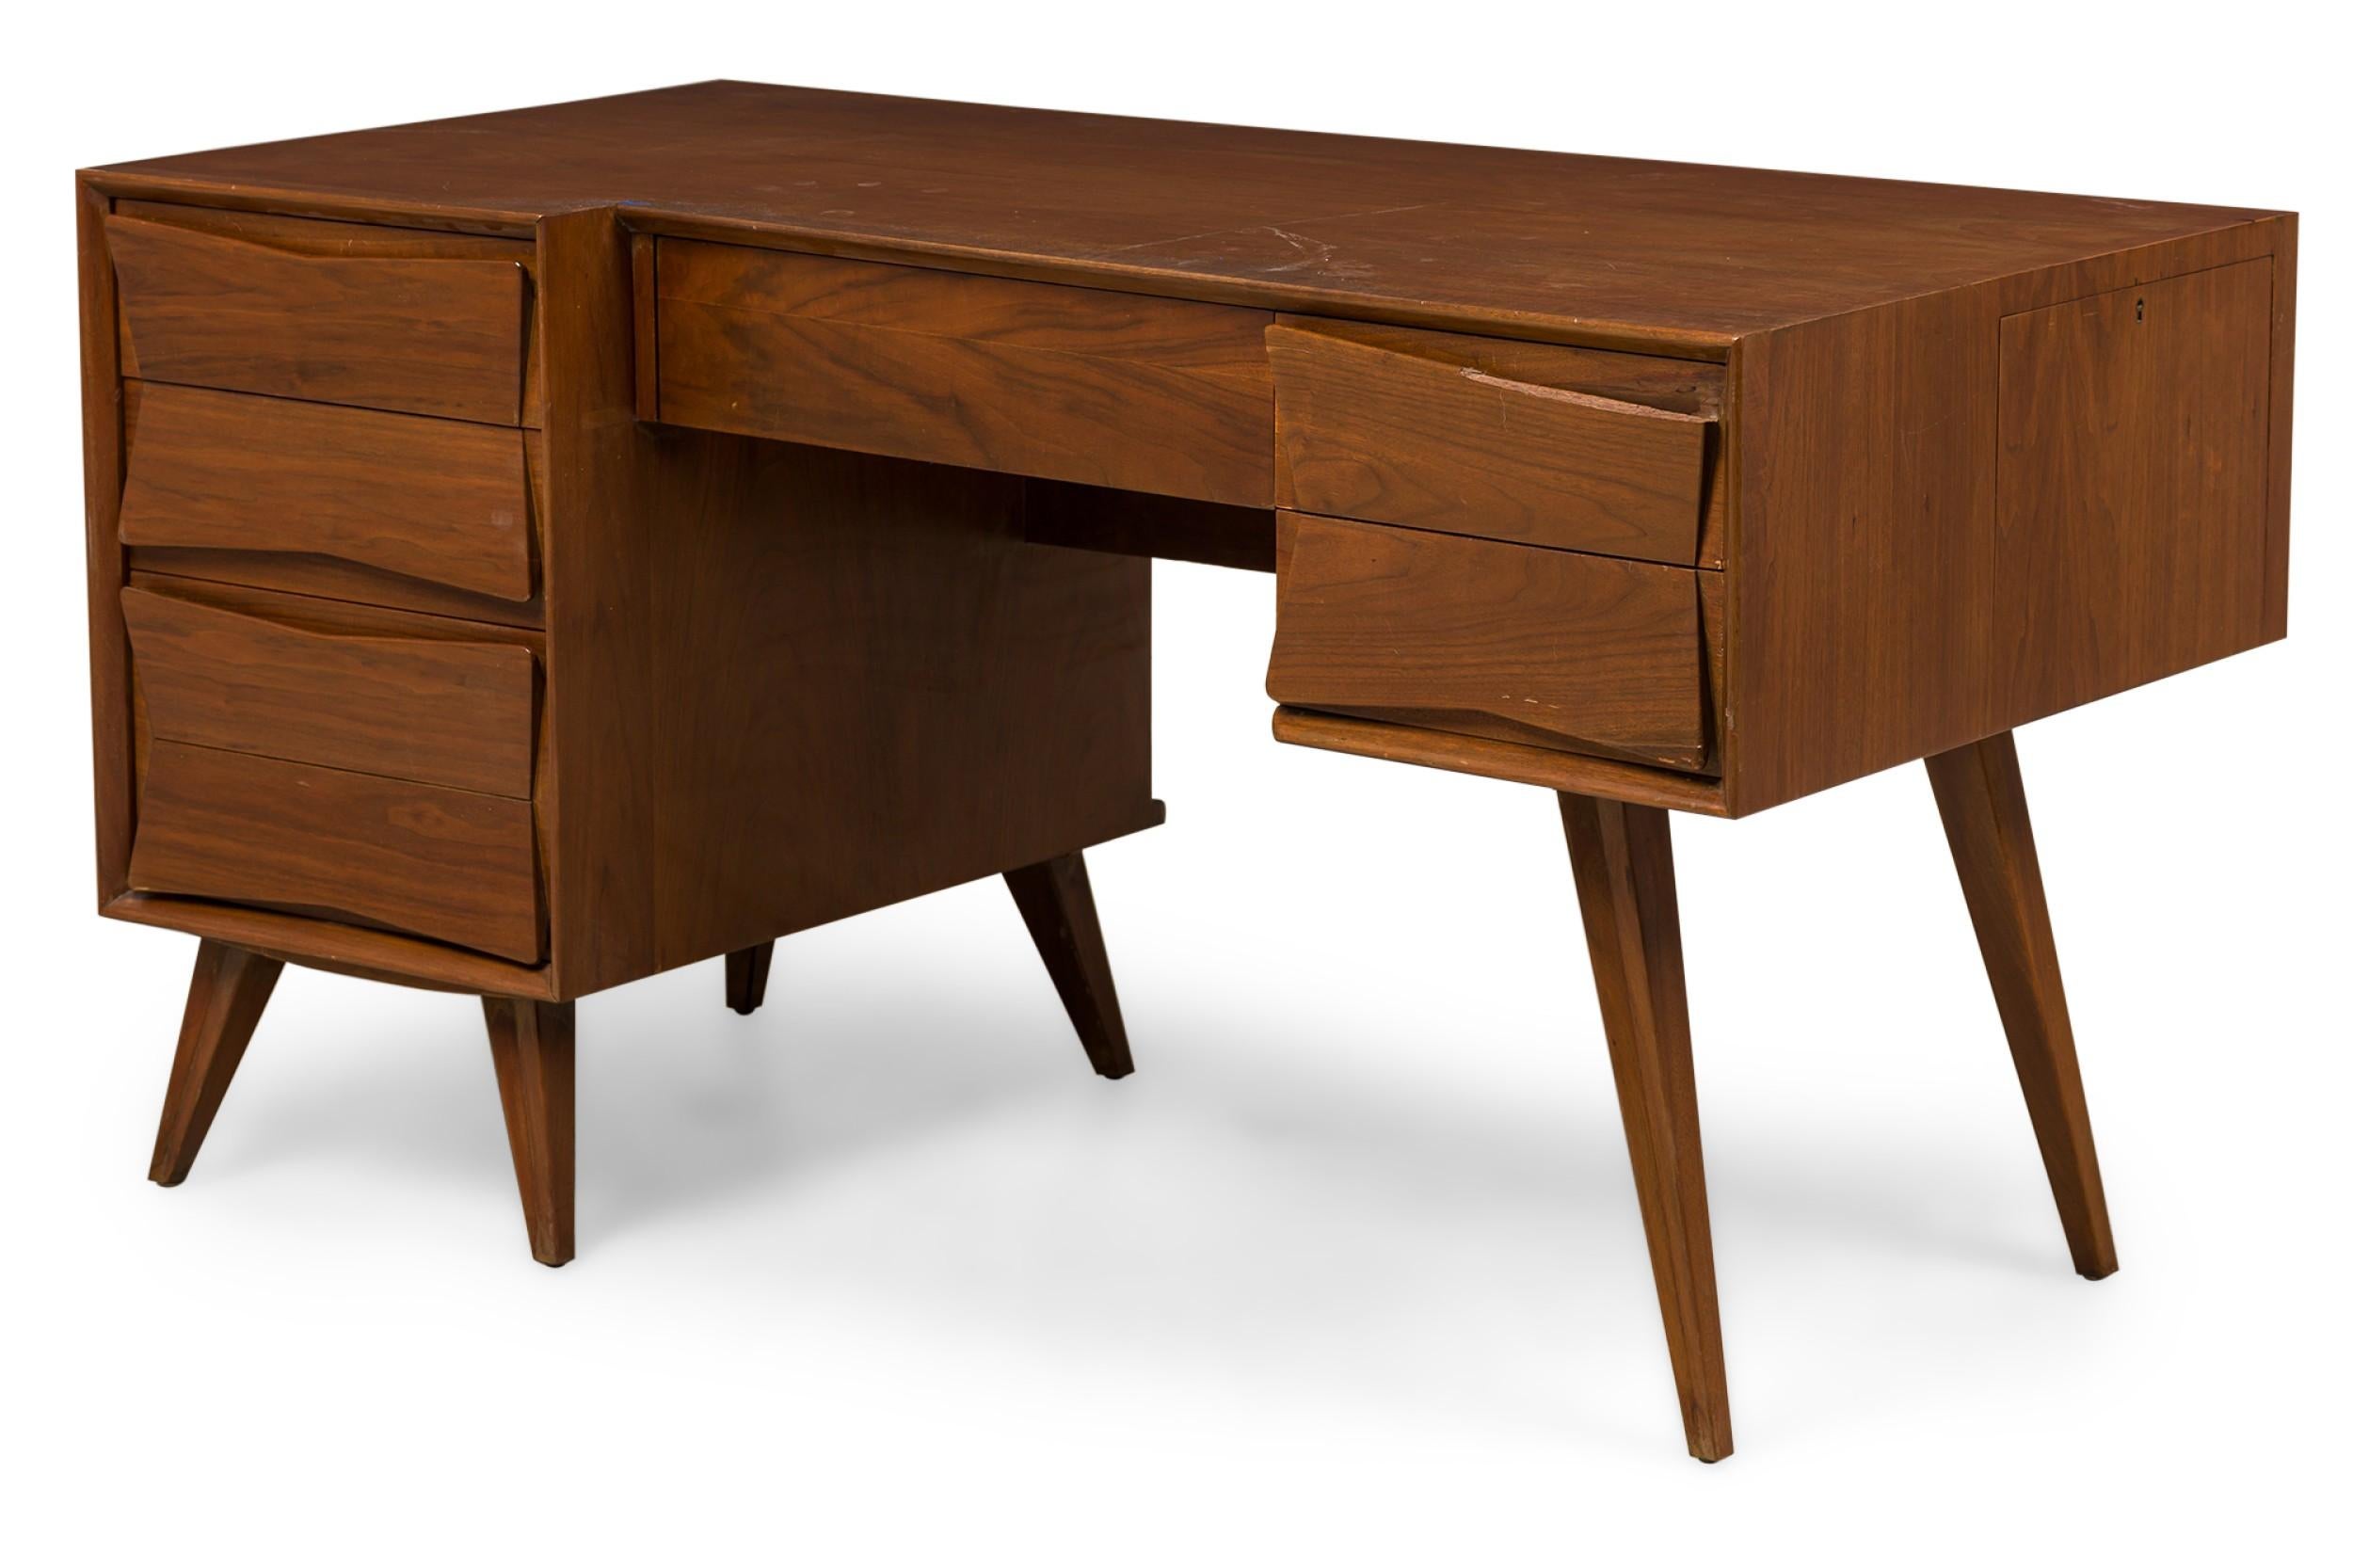 Italian Mid-Century walnut desk with a centere drawer flanked by 2 shaped front drawers on the right and 3 on the left suppoted on angled legs (style of GIO PONTI)
